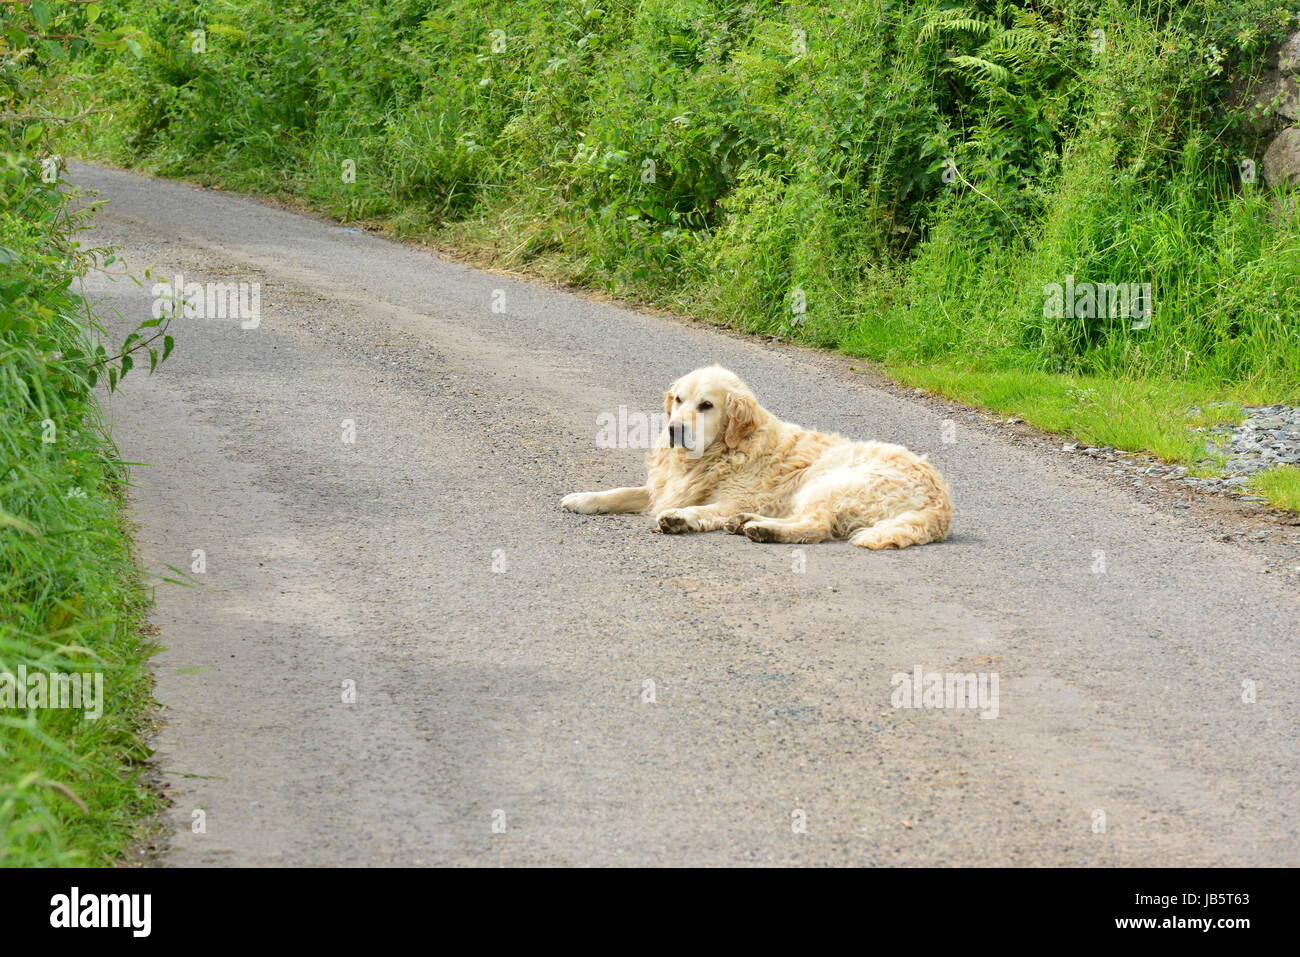 A dog sitting in the middle of the road in Ireland sunbathing. Stock Photo